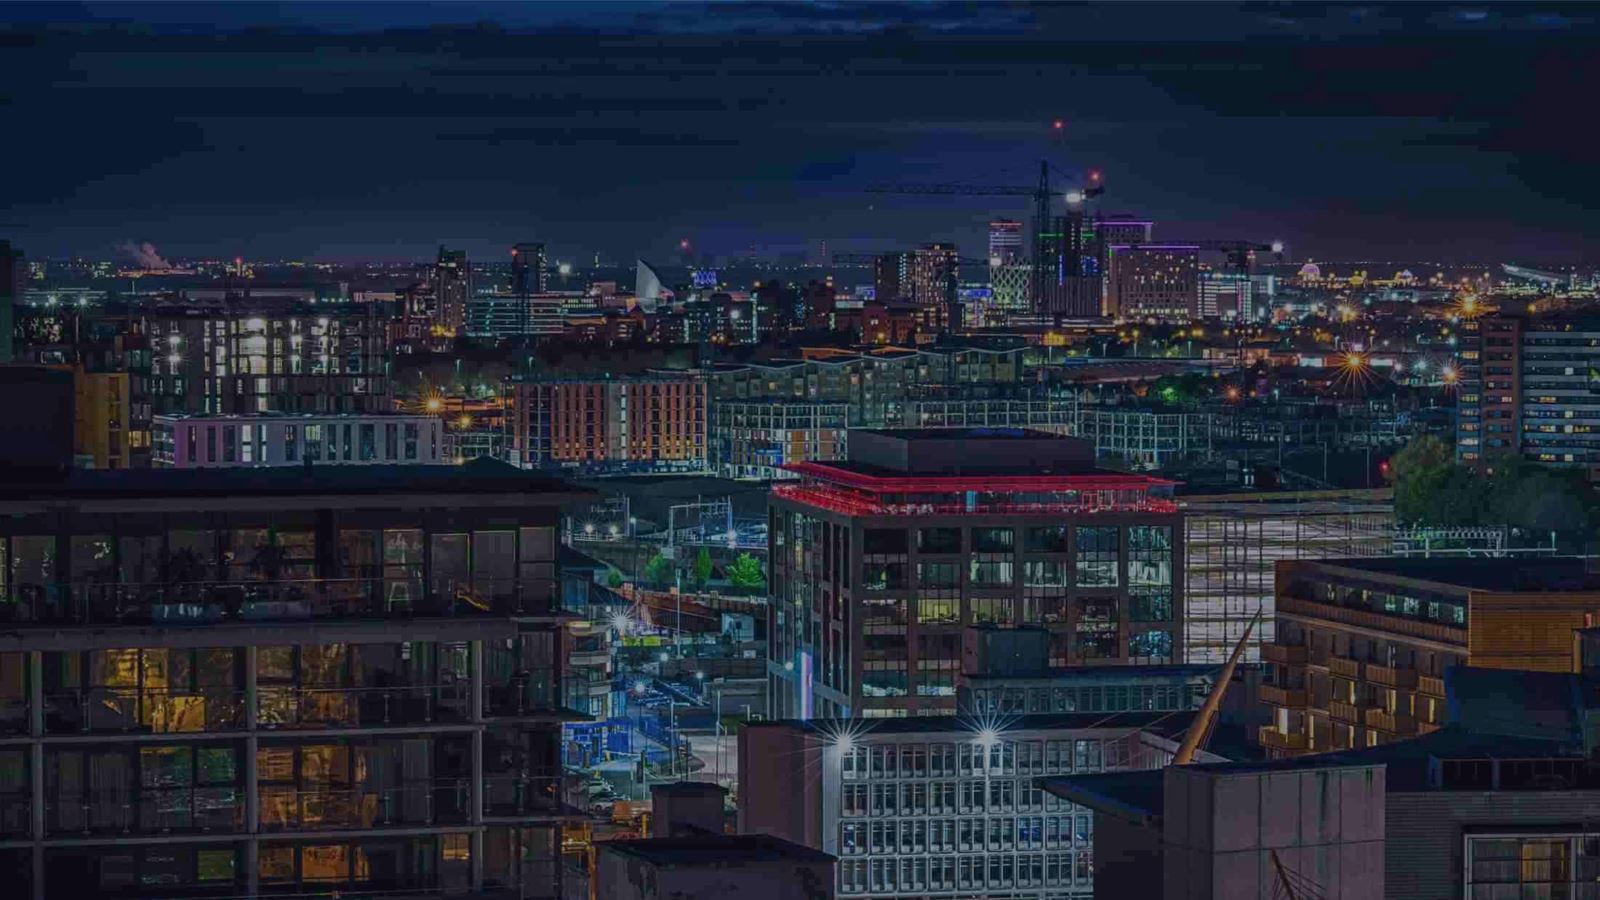 manchester city scape by night - tall office buildings w